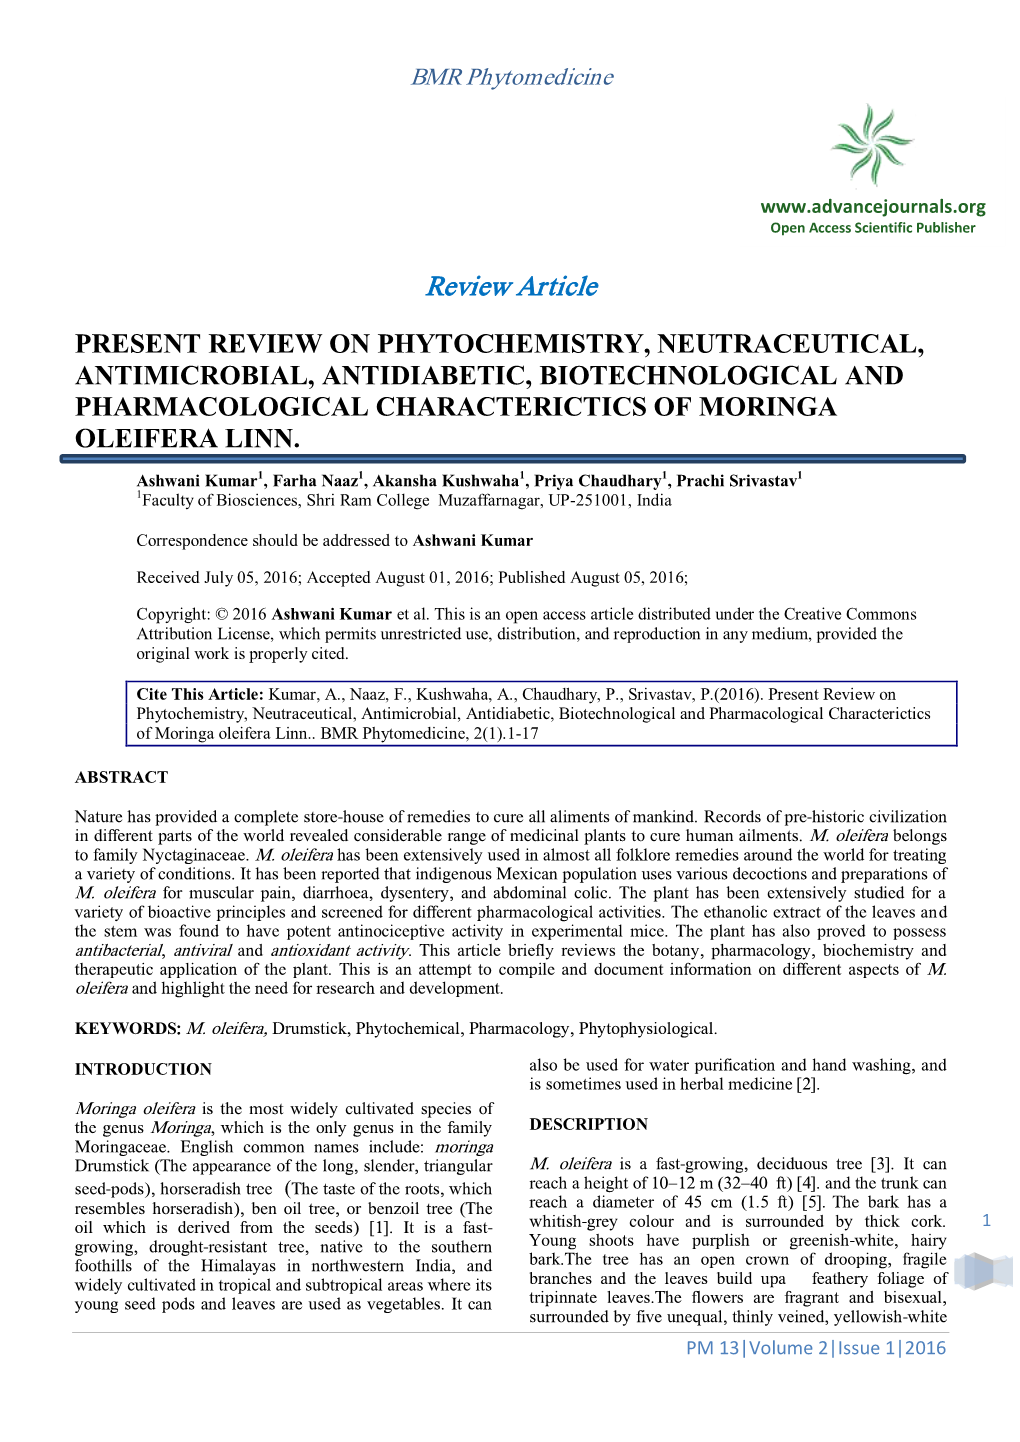 Present Review on Phytochemistry, Neutraceutical, Antimicrobial, Antidiabetic, Biotechnological and Pharmacological Characterictics of Moringa Oleifera Linn